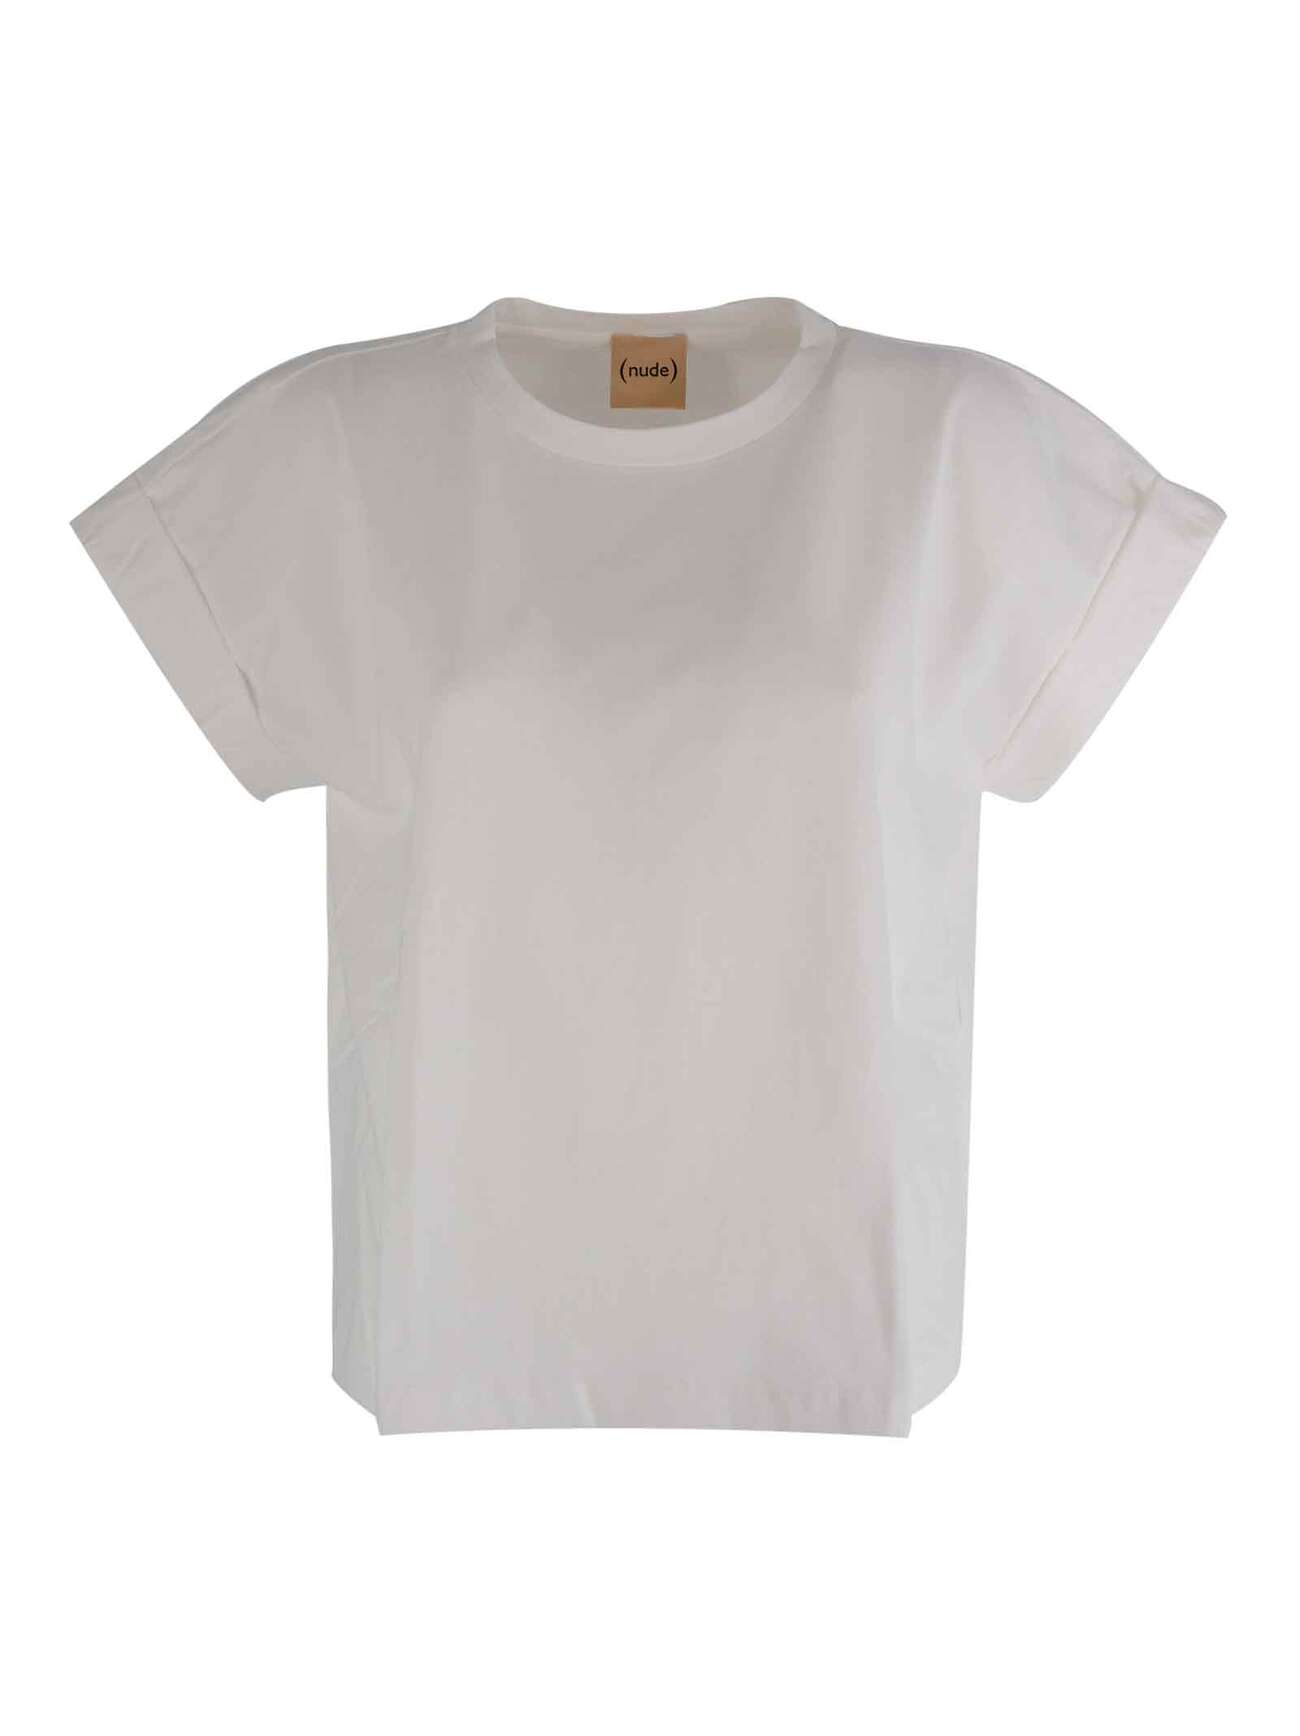 (nude) Cotton T-shirt in white